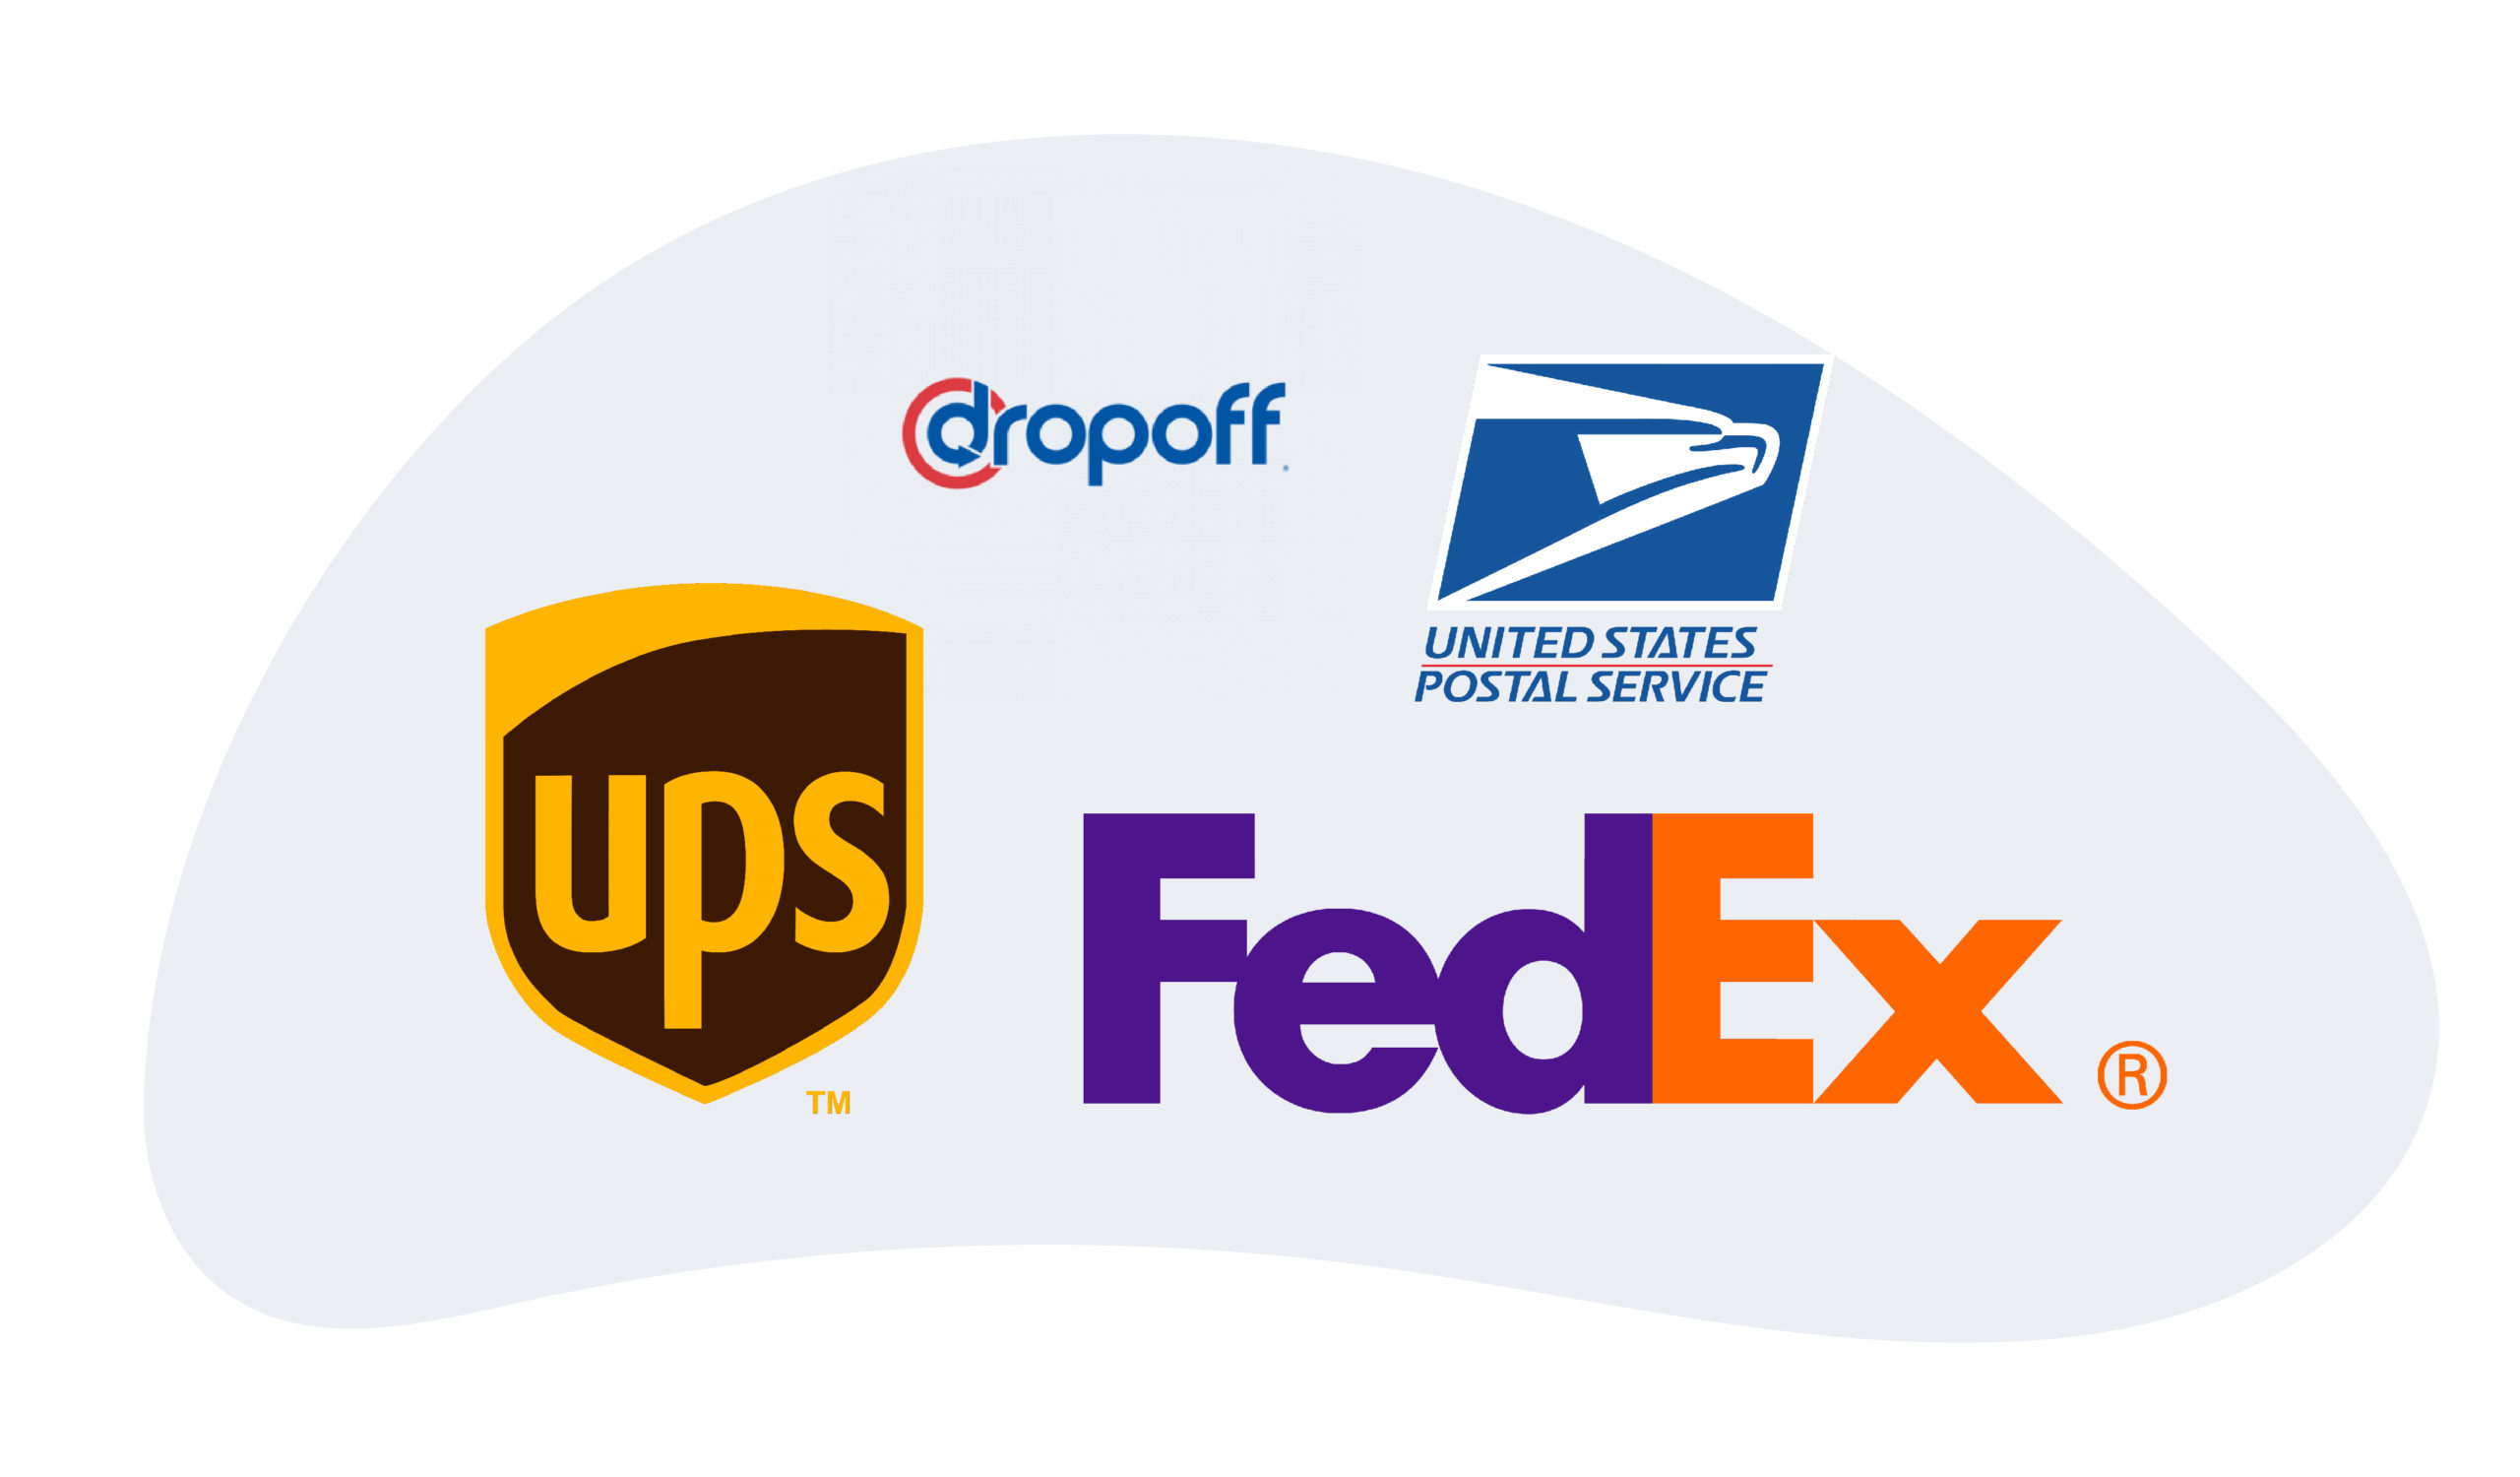 Modern Express - Most Dependable Delivery Service in San Francisco